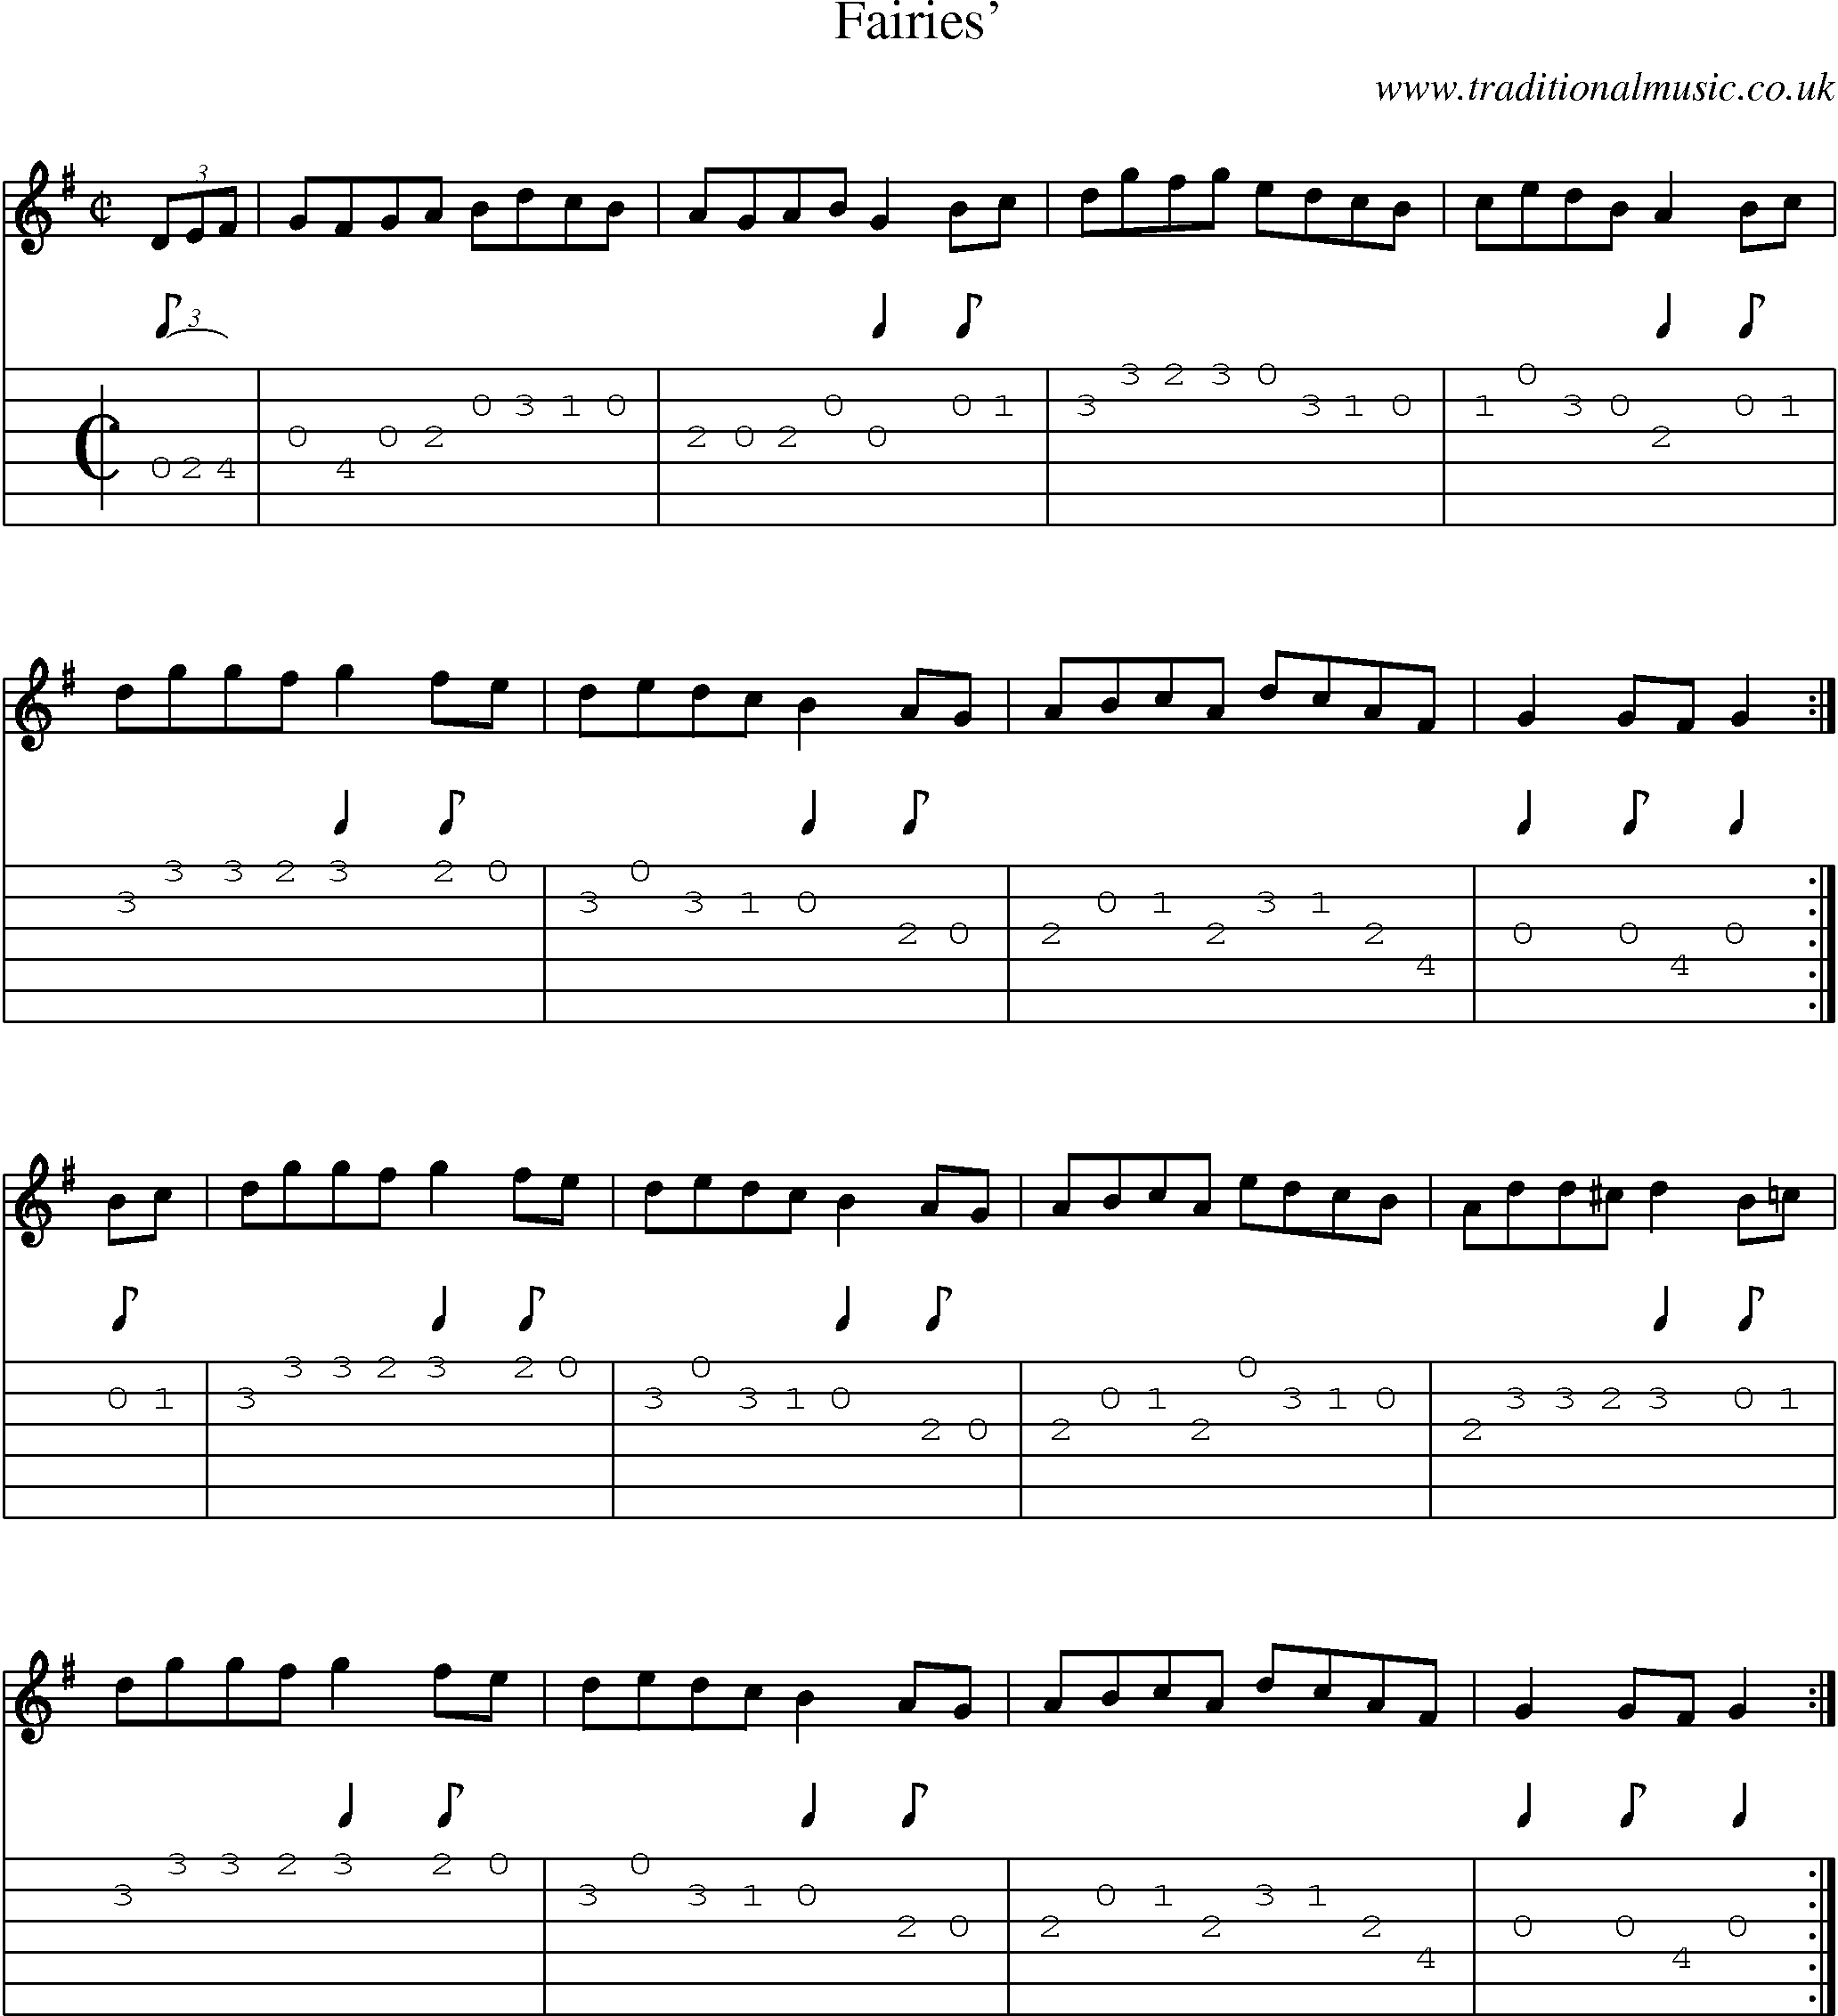 Music Score and Guitar Tabs for Fairies